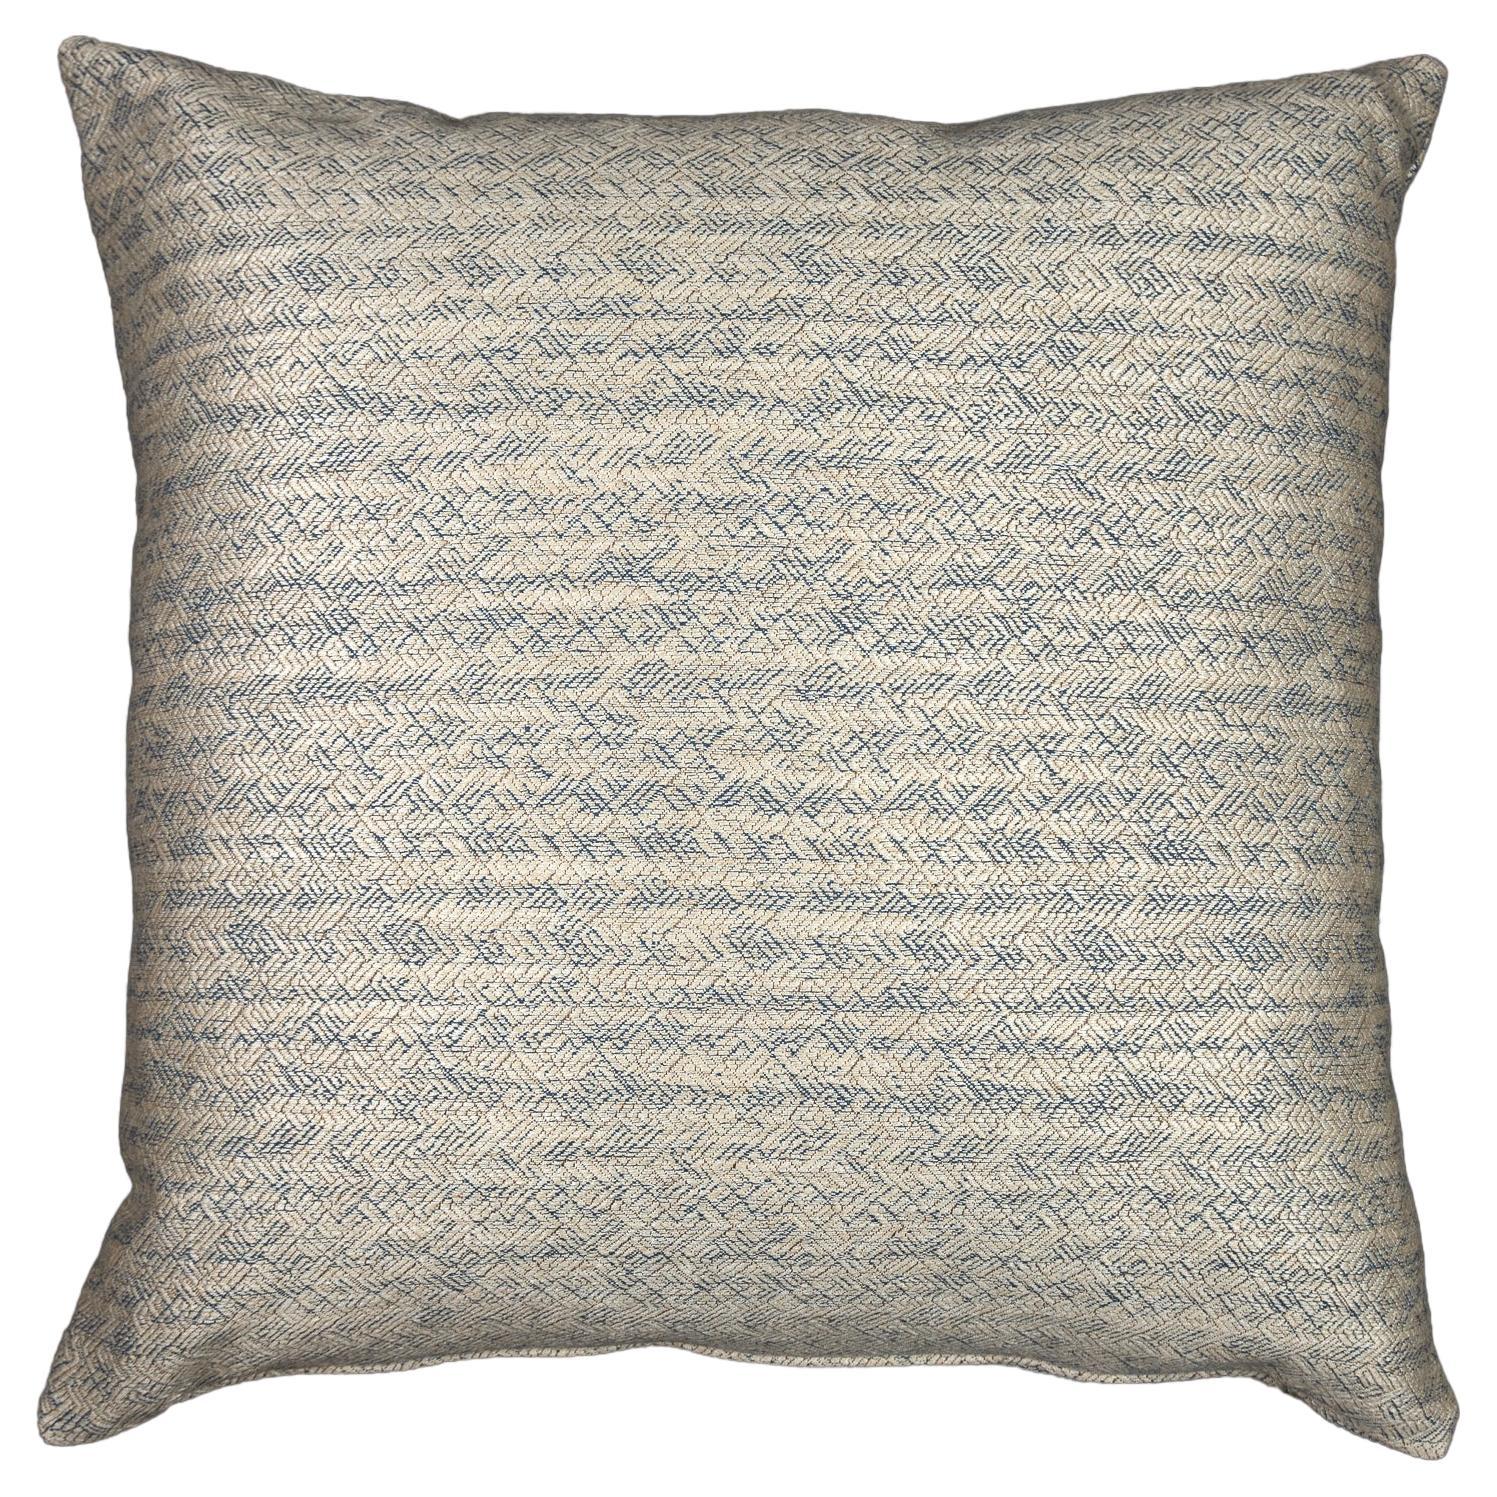 Linen and cotton blend white & navy throw pillow- by Mar de Doce For Sale